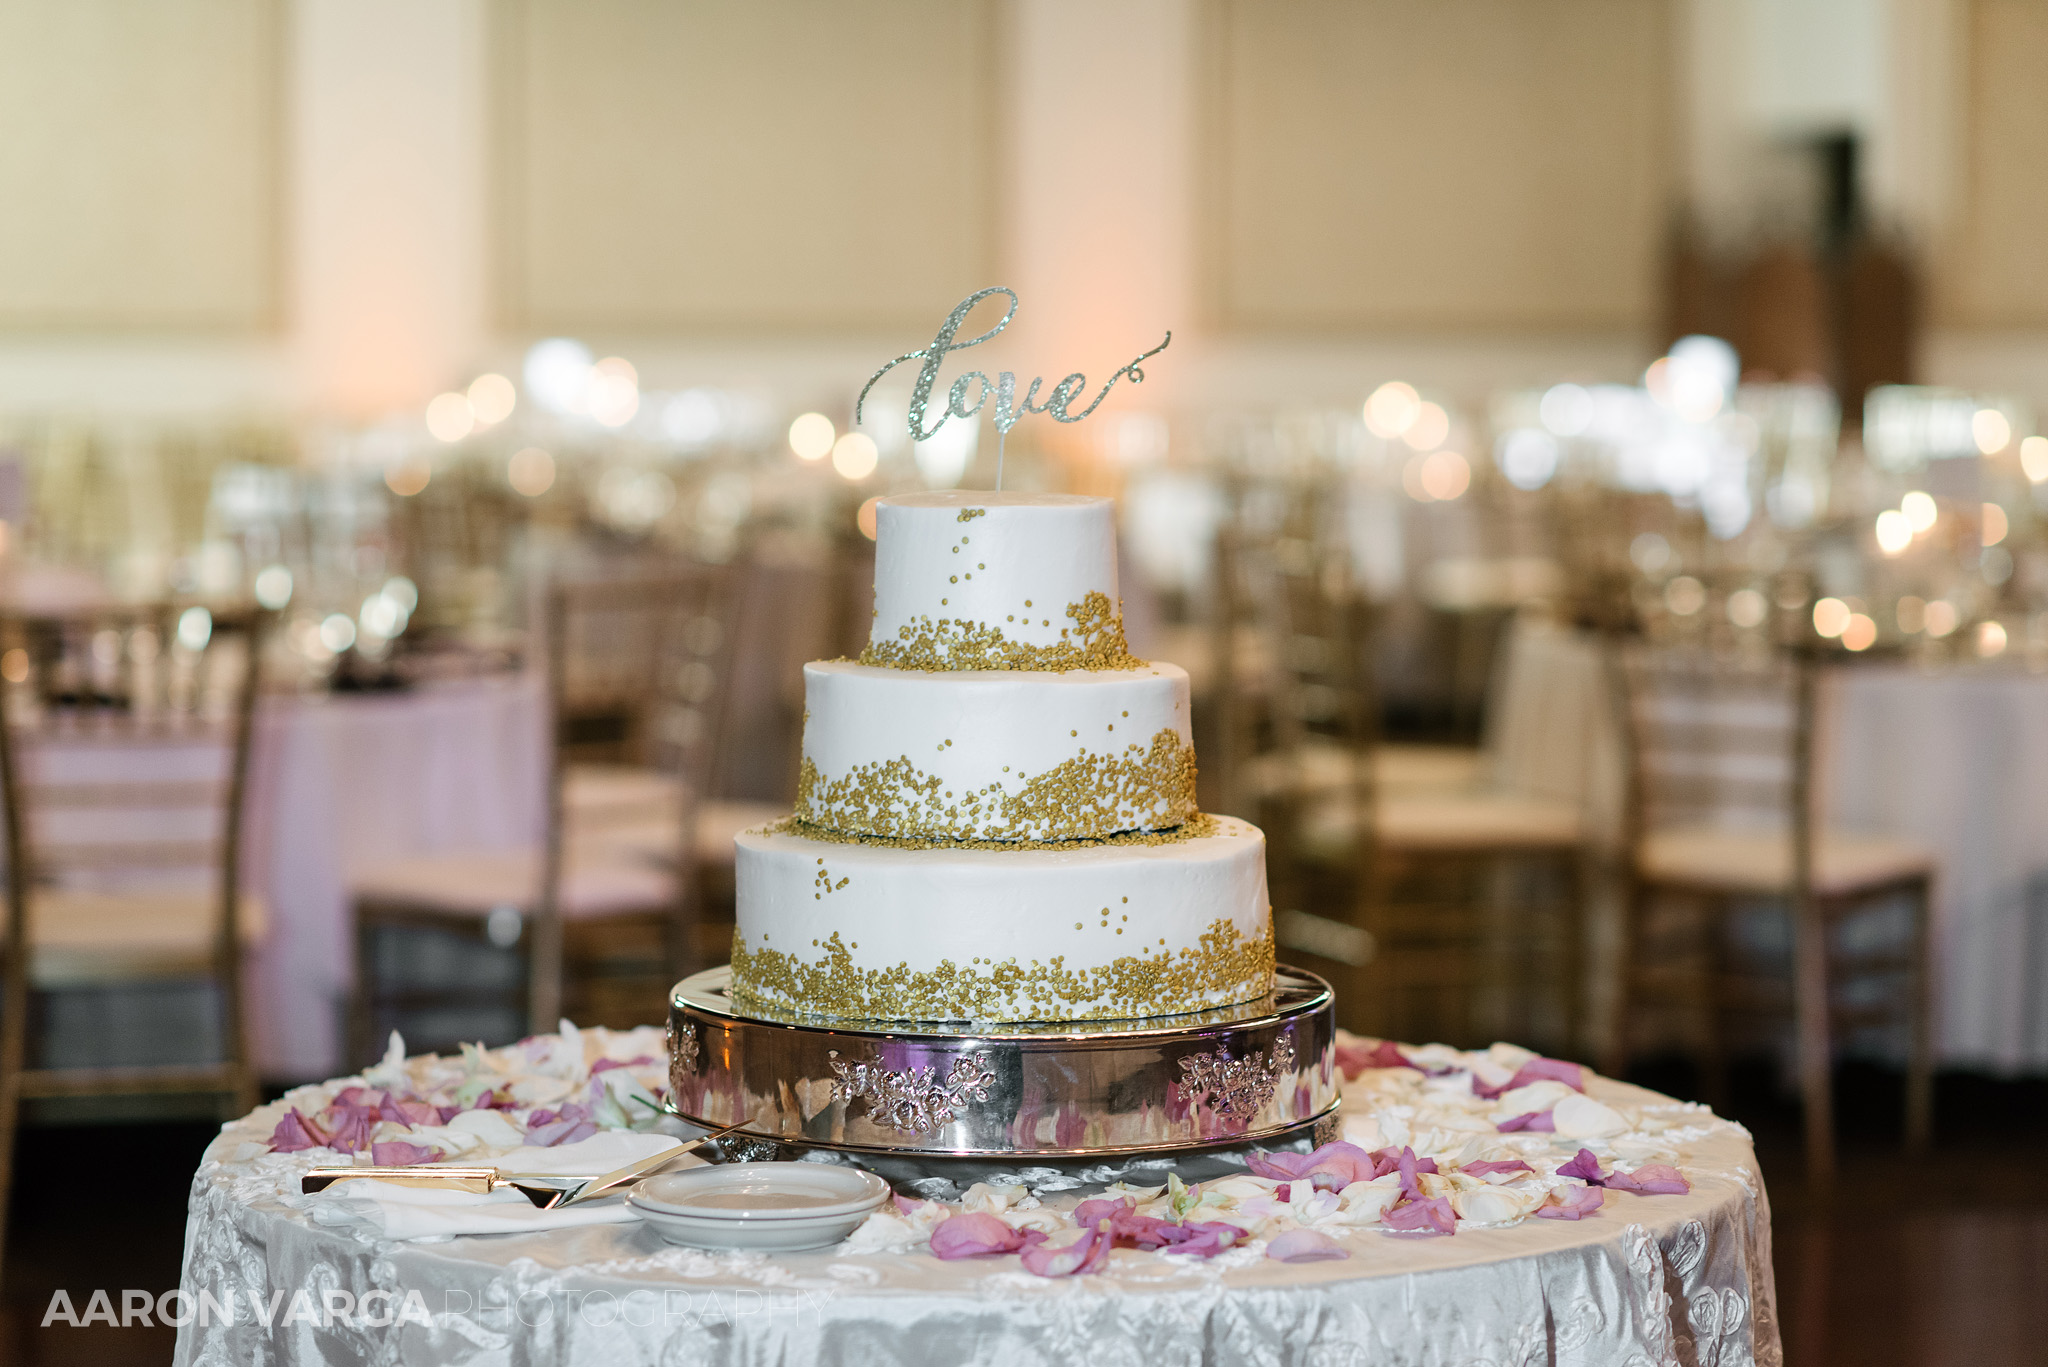 09 montour heights country club wedding - Best of 2017: Cakes